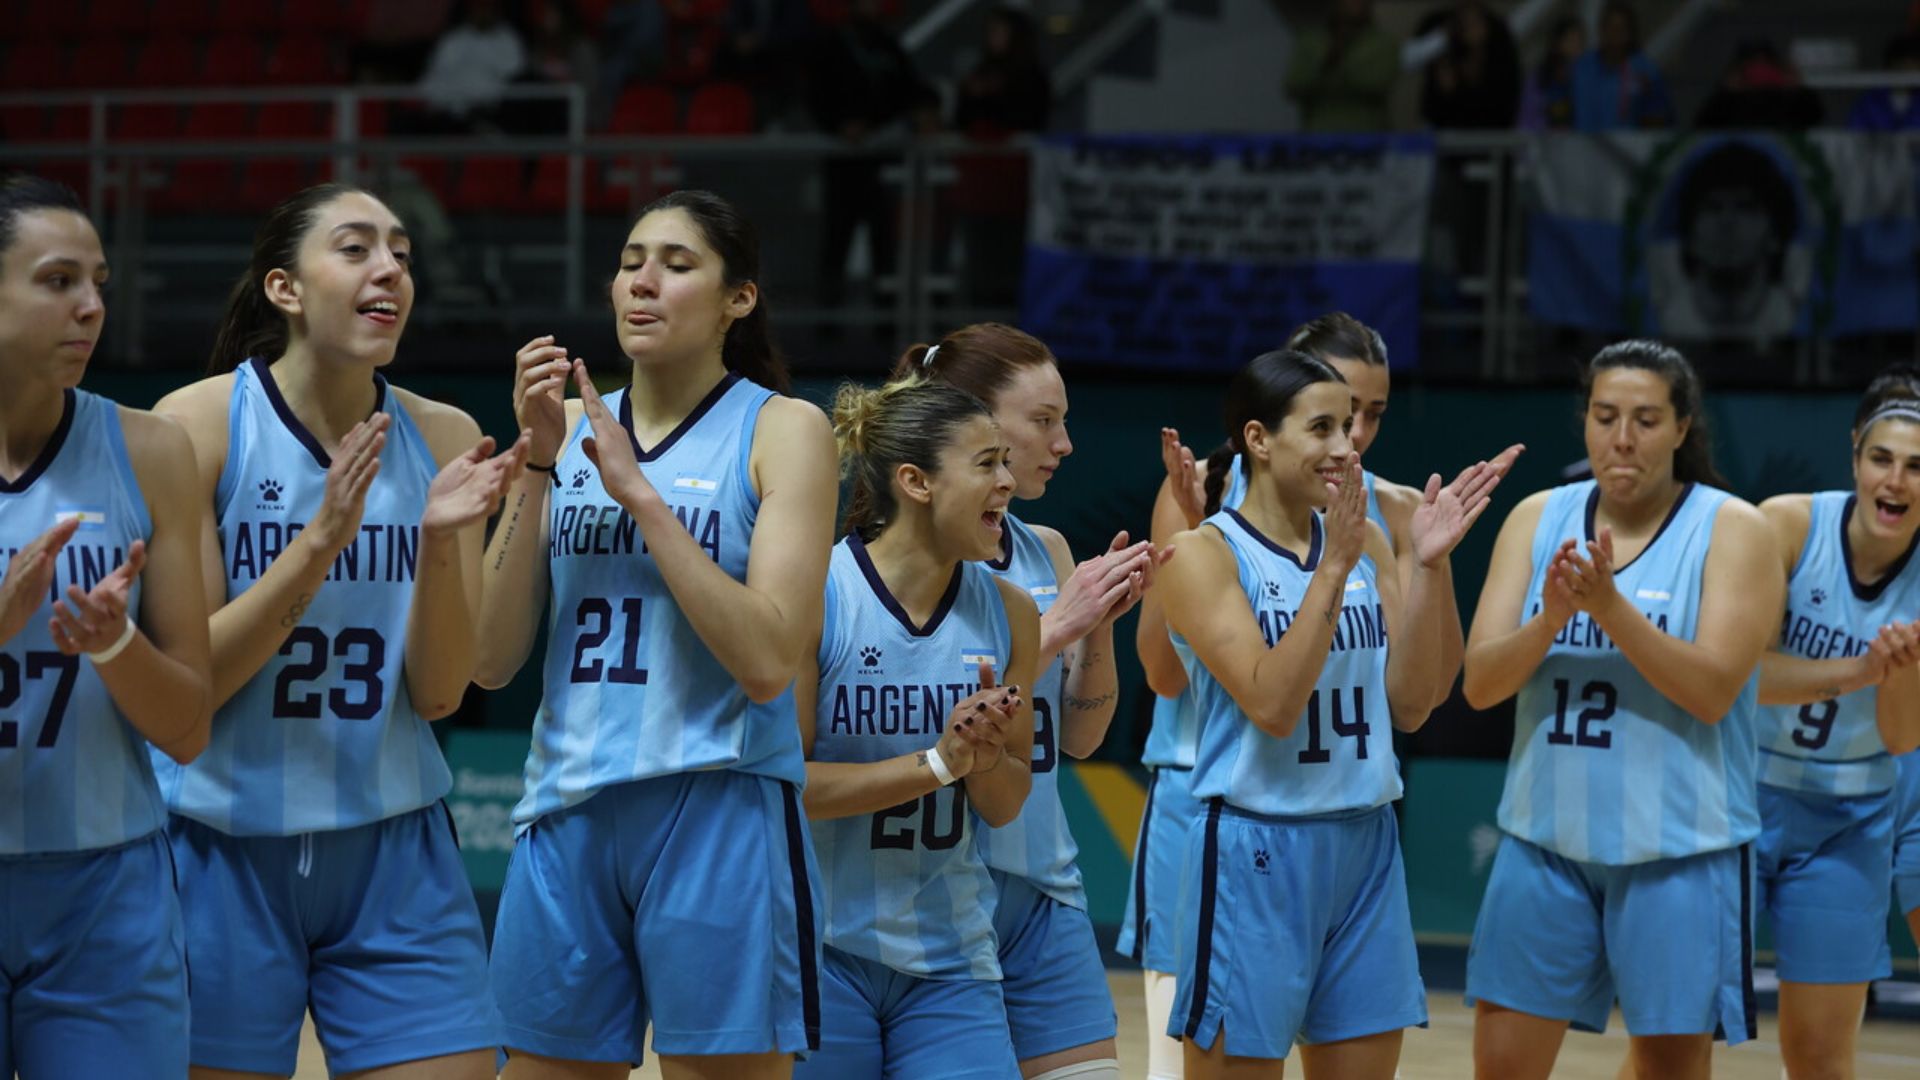 Argentina wins bronze and makes history in female basketball